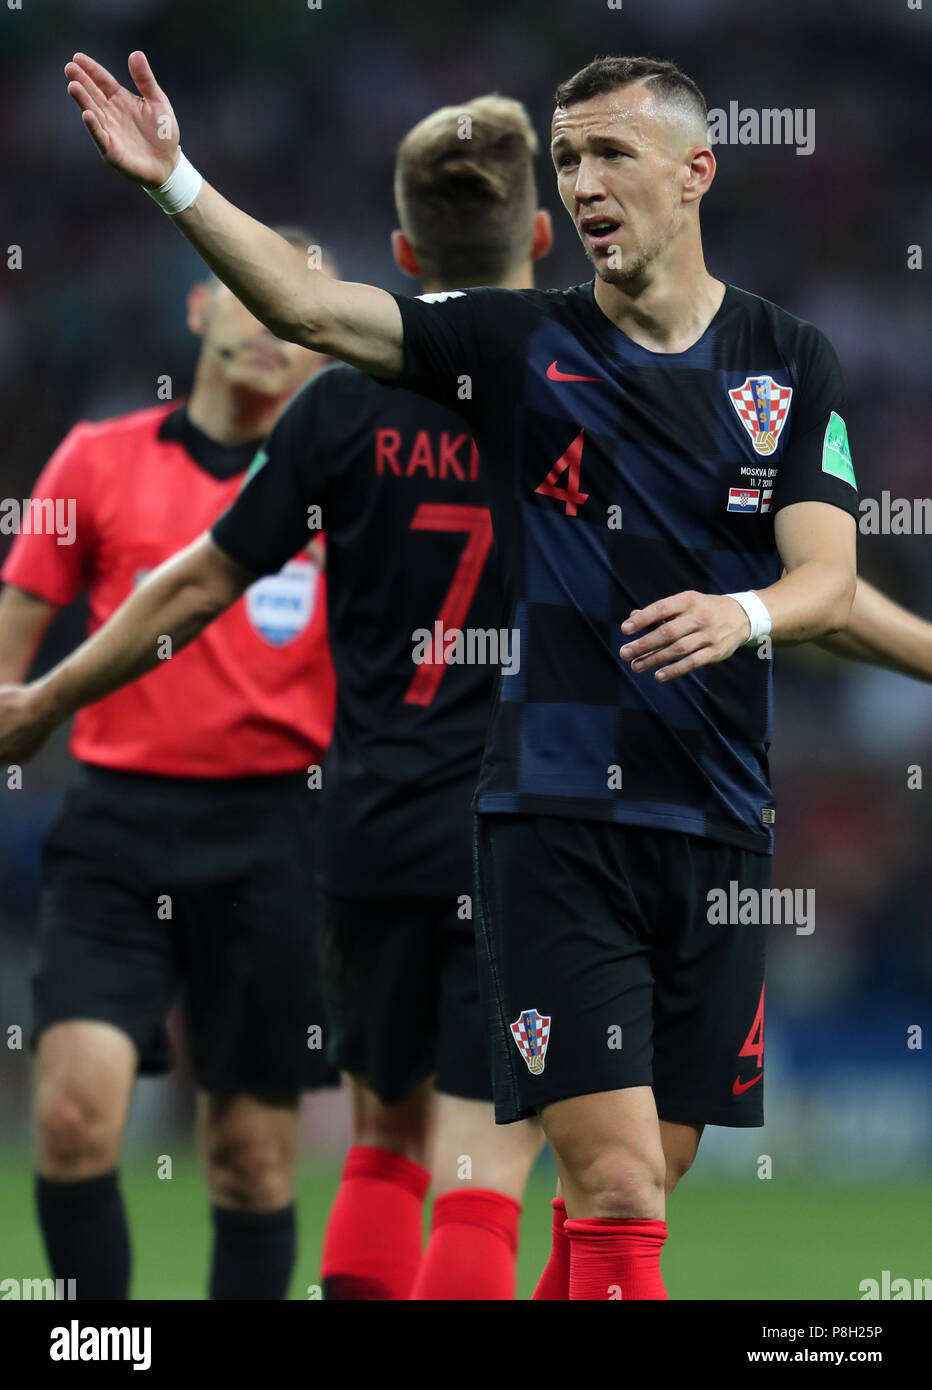 Ivan Perisic  CROATIA V ENGLAND  CROATIA V ENGLAND , 2018 FIFA WORLD CUP RUSSIA  11 July 2018  GBC9521  2018 FIFA World Cup Russia, Semi Final    STRICTLY EDITORIAL USE ONLY.   If The Player/Players Depicted In This Image Is/Are Playing For An English Club Or The England National Team.   Then This Image May Only Be Used For Editorial Purposes. No Commercial Use.    The Following Usages Are Also Restricted EVEN IF IN AN EDITORIAL CONTEXT:   Use in conjuction with, or part of, any unauthorized audio, video, data, fixture lists, club/league logos, Betting, Games or any 'live' services.    Also Re Stock Photo